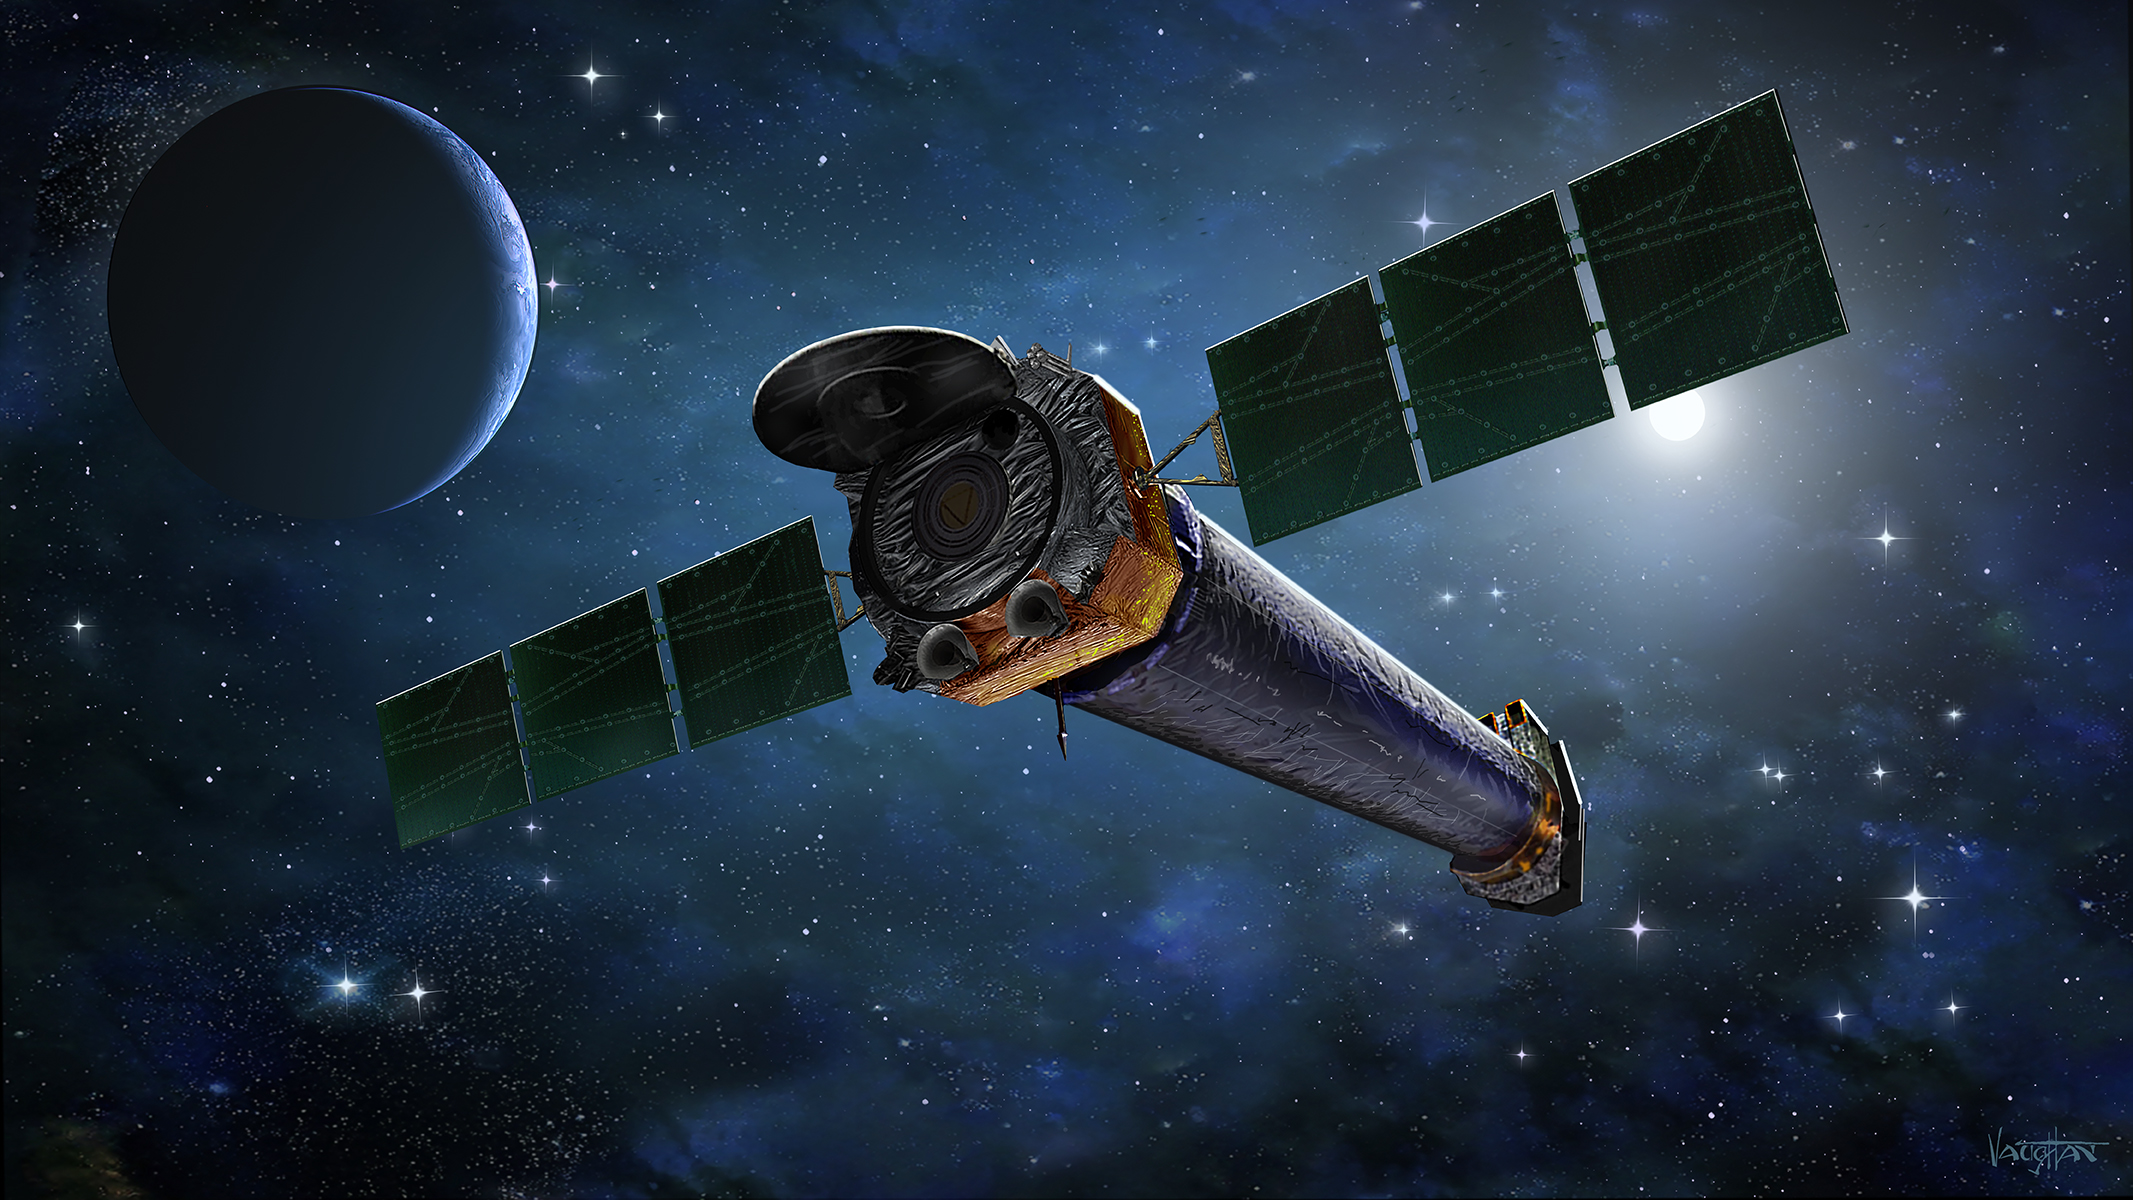 An artist's impression of Chandra in orbit, shown against a backdrop of Earth, the Sun, and a swath of stars.